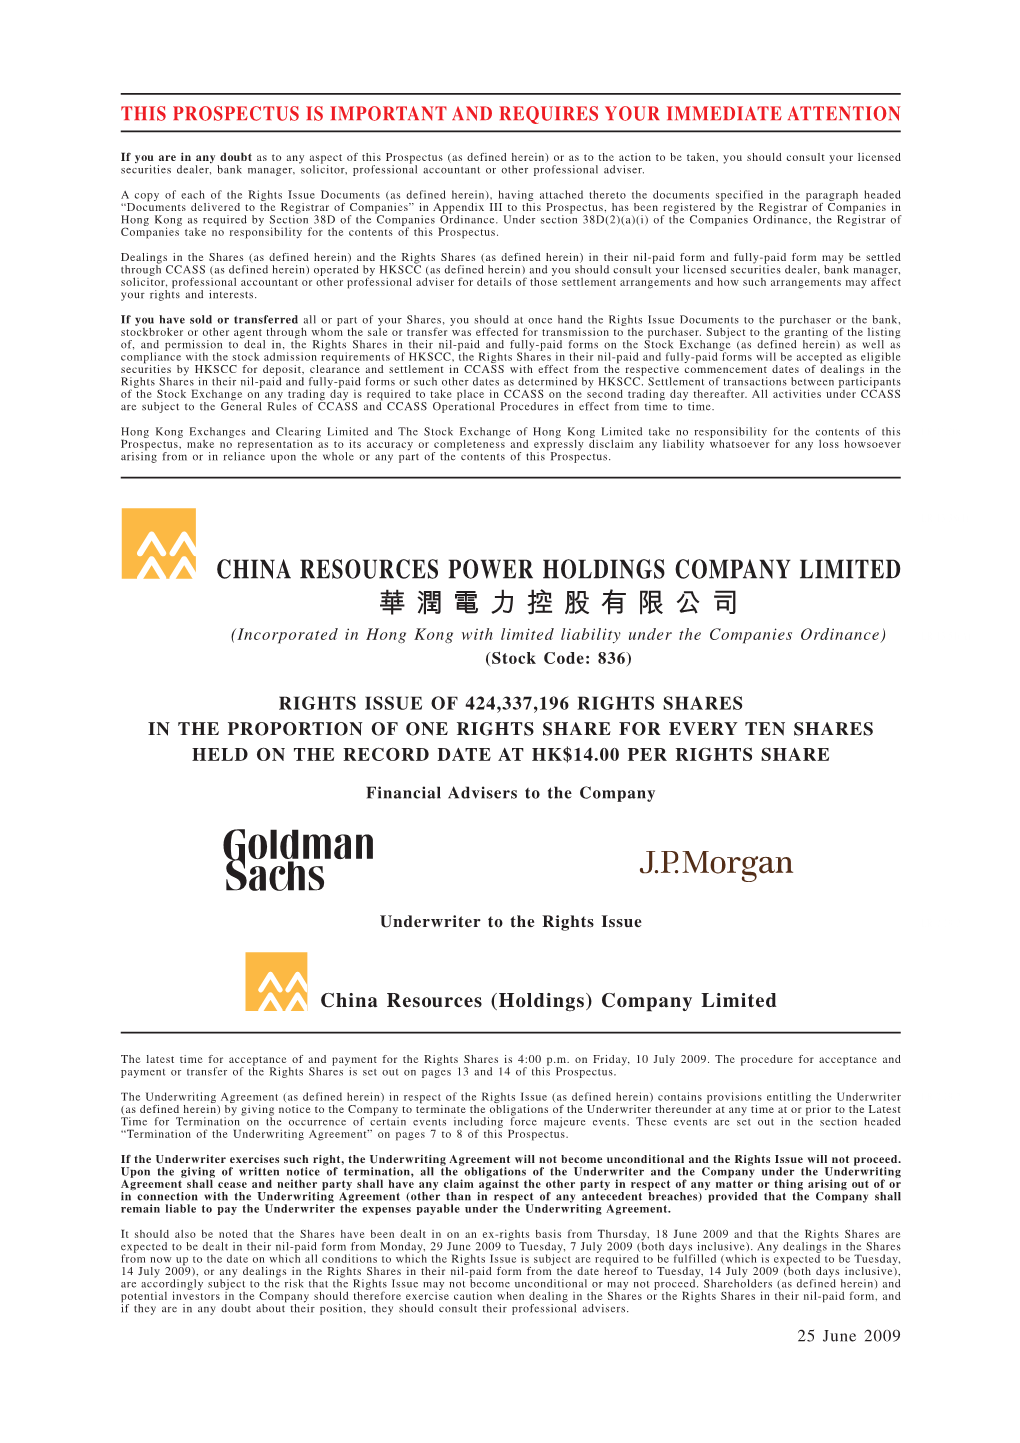 China Resources Power Holdings Company Limited